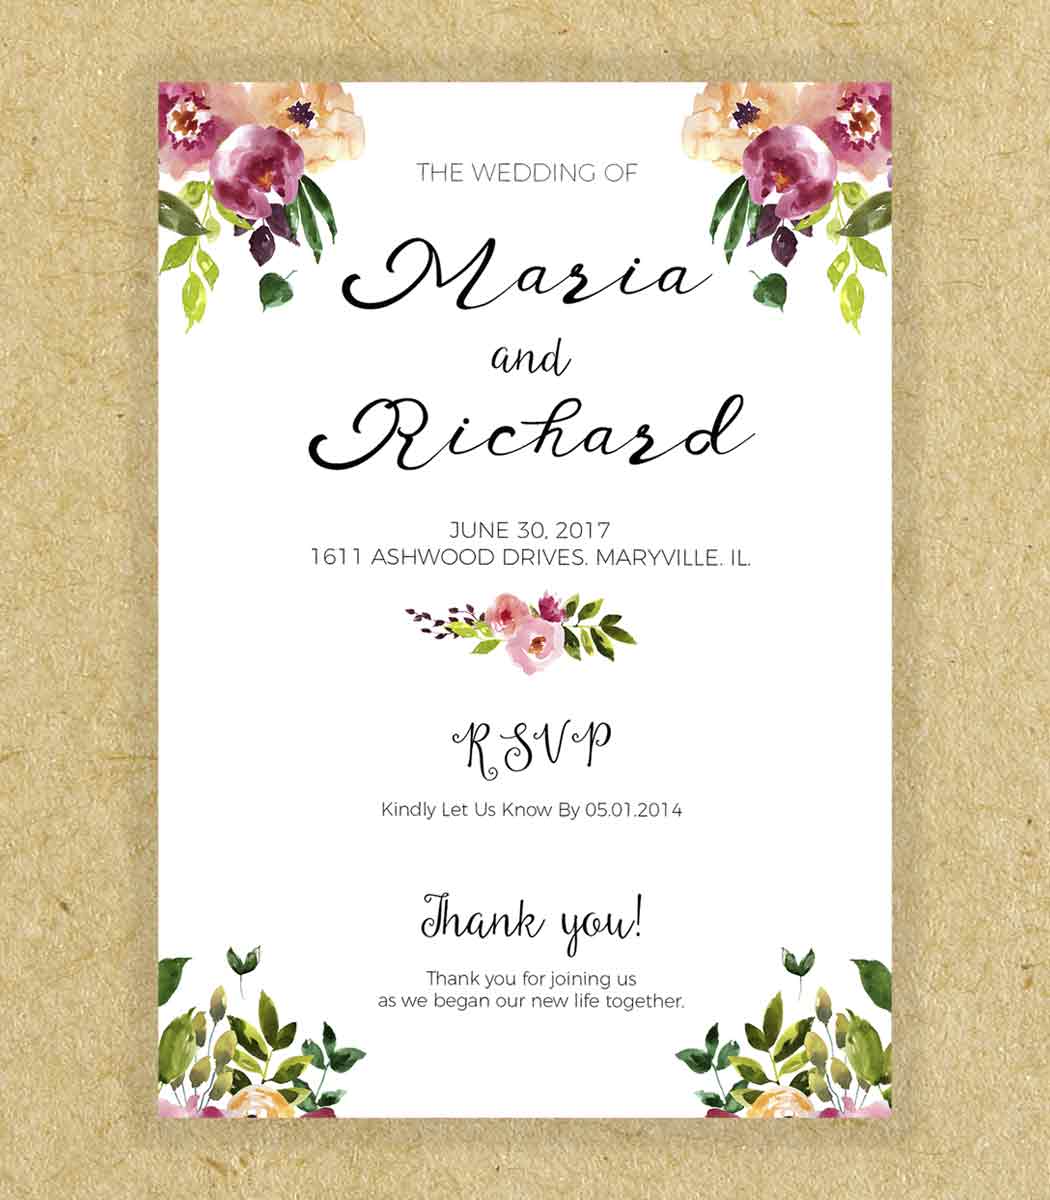 marriage-invitations-card-for-friends